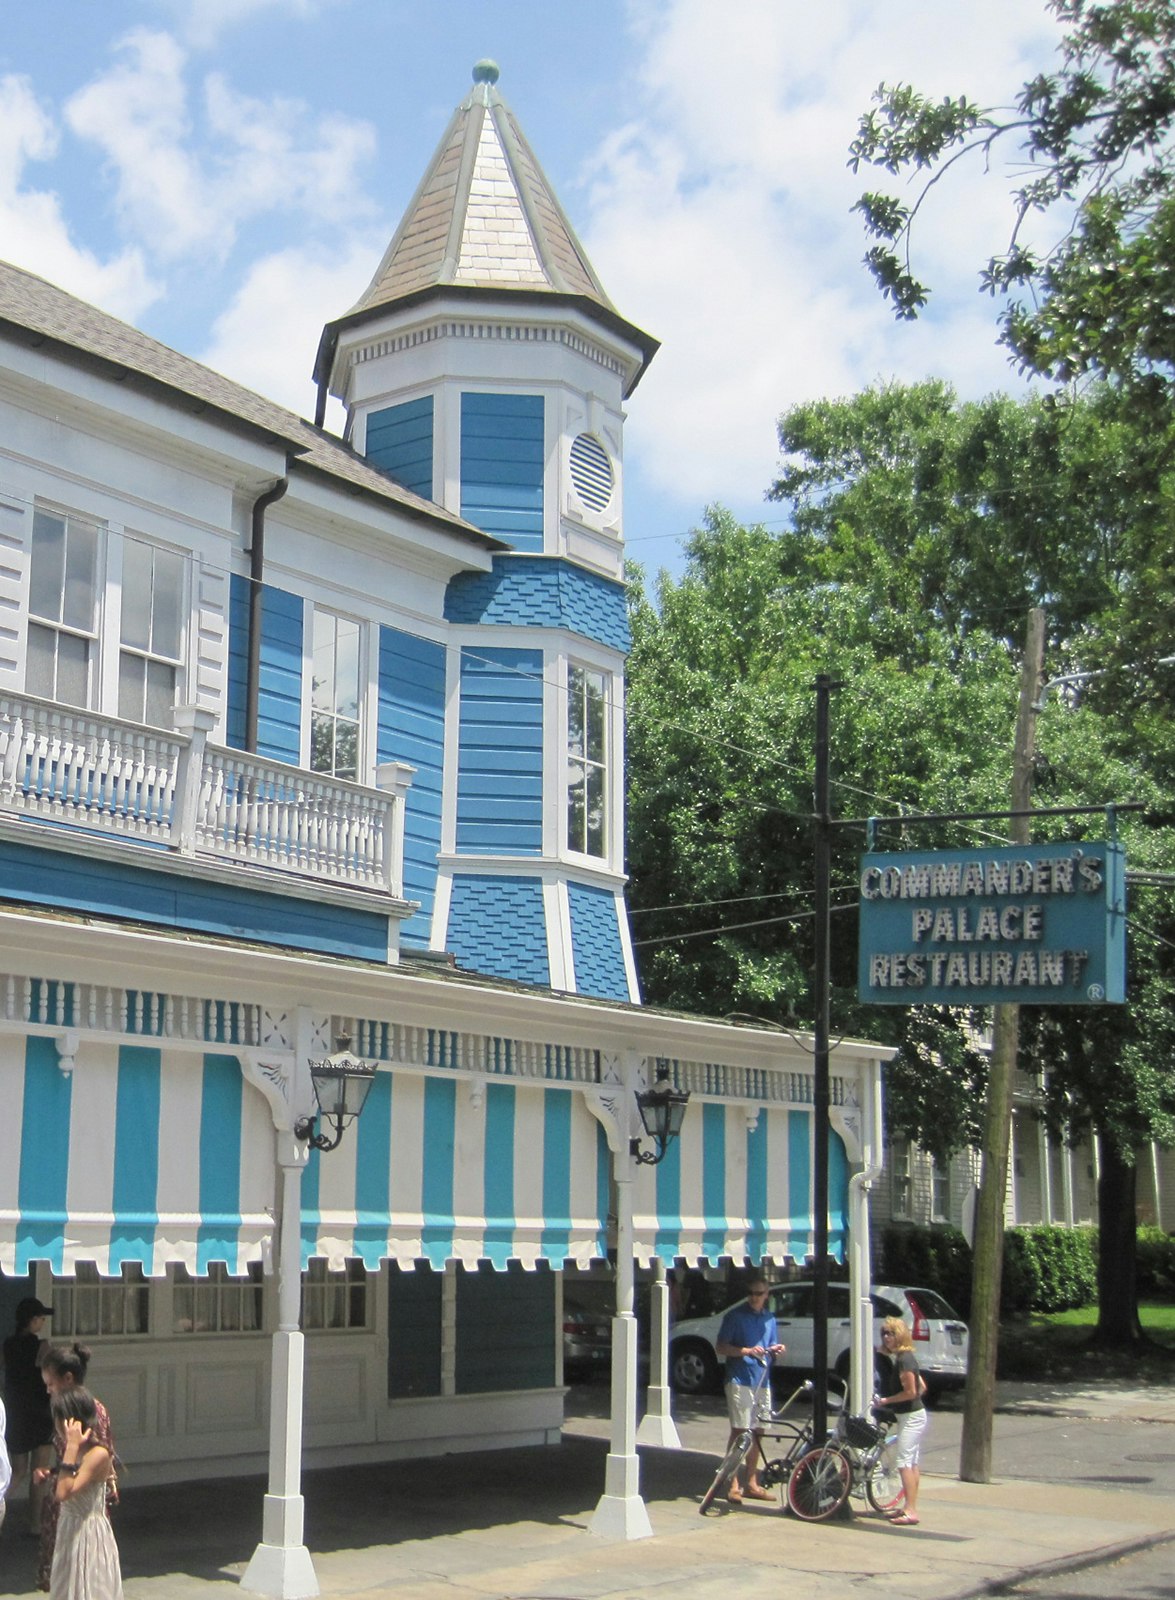 Exterior shot of Commander's Palace in New Orleans – a large, Victorian building painted turquoise blue with white trim – on a sunny day in the Garden District